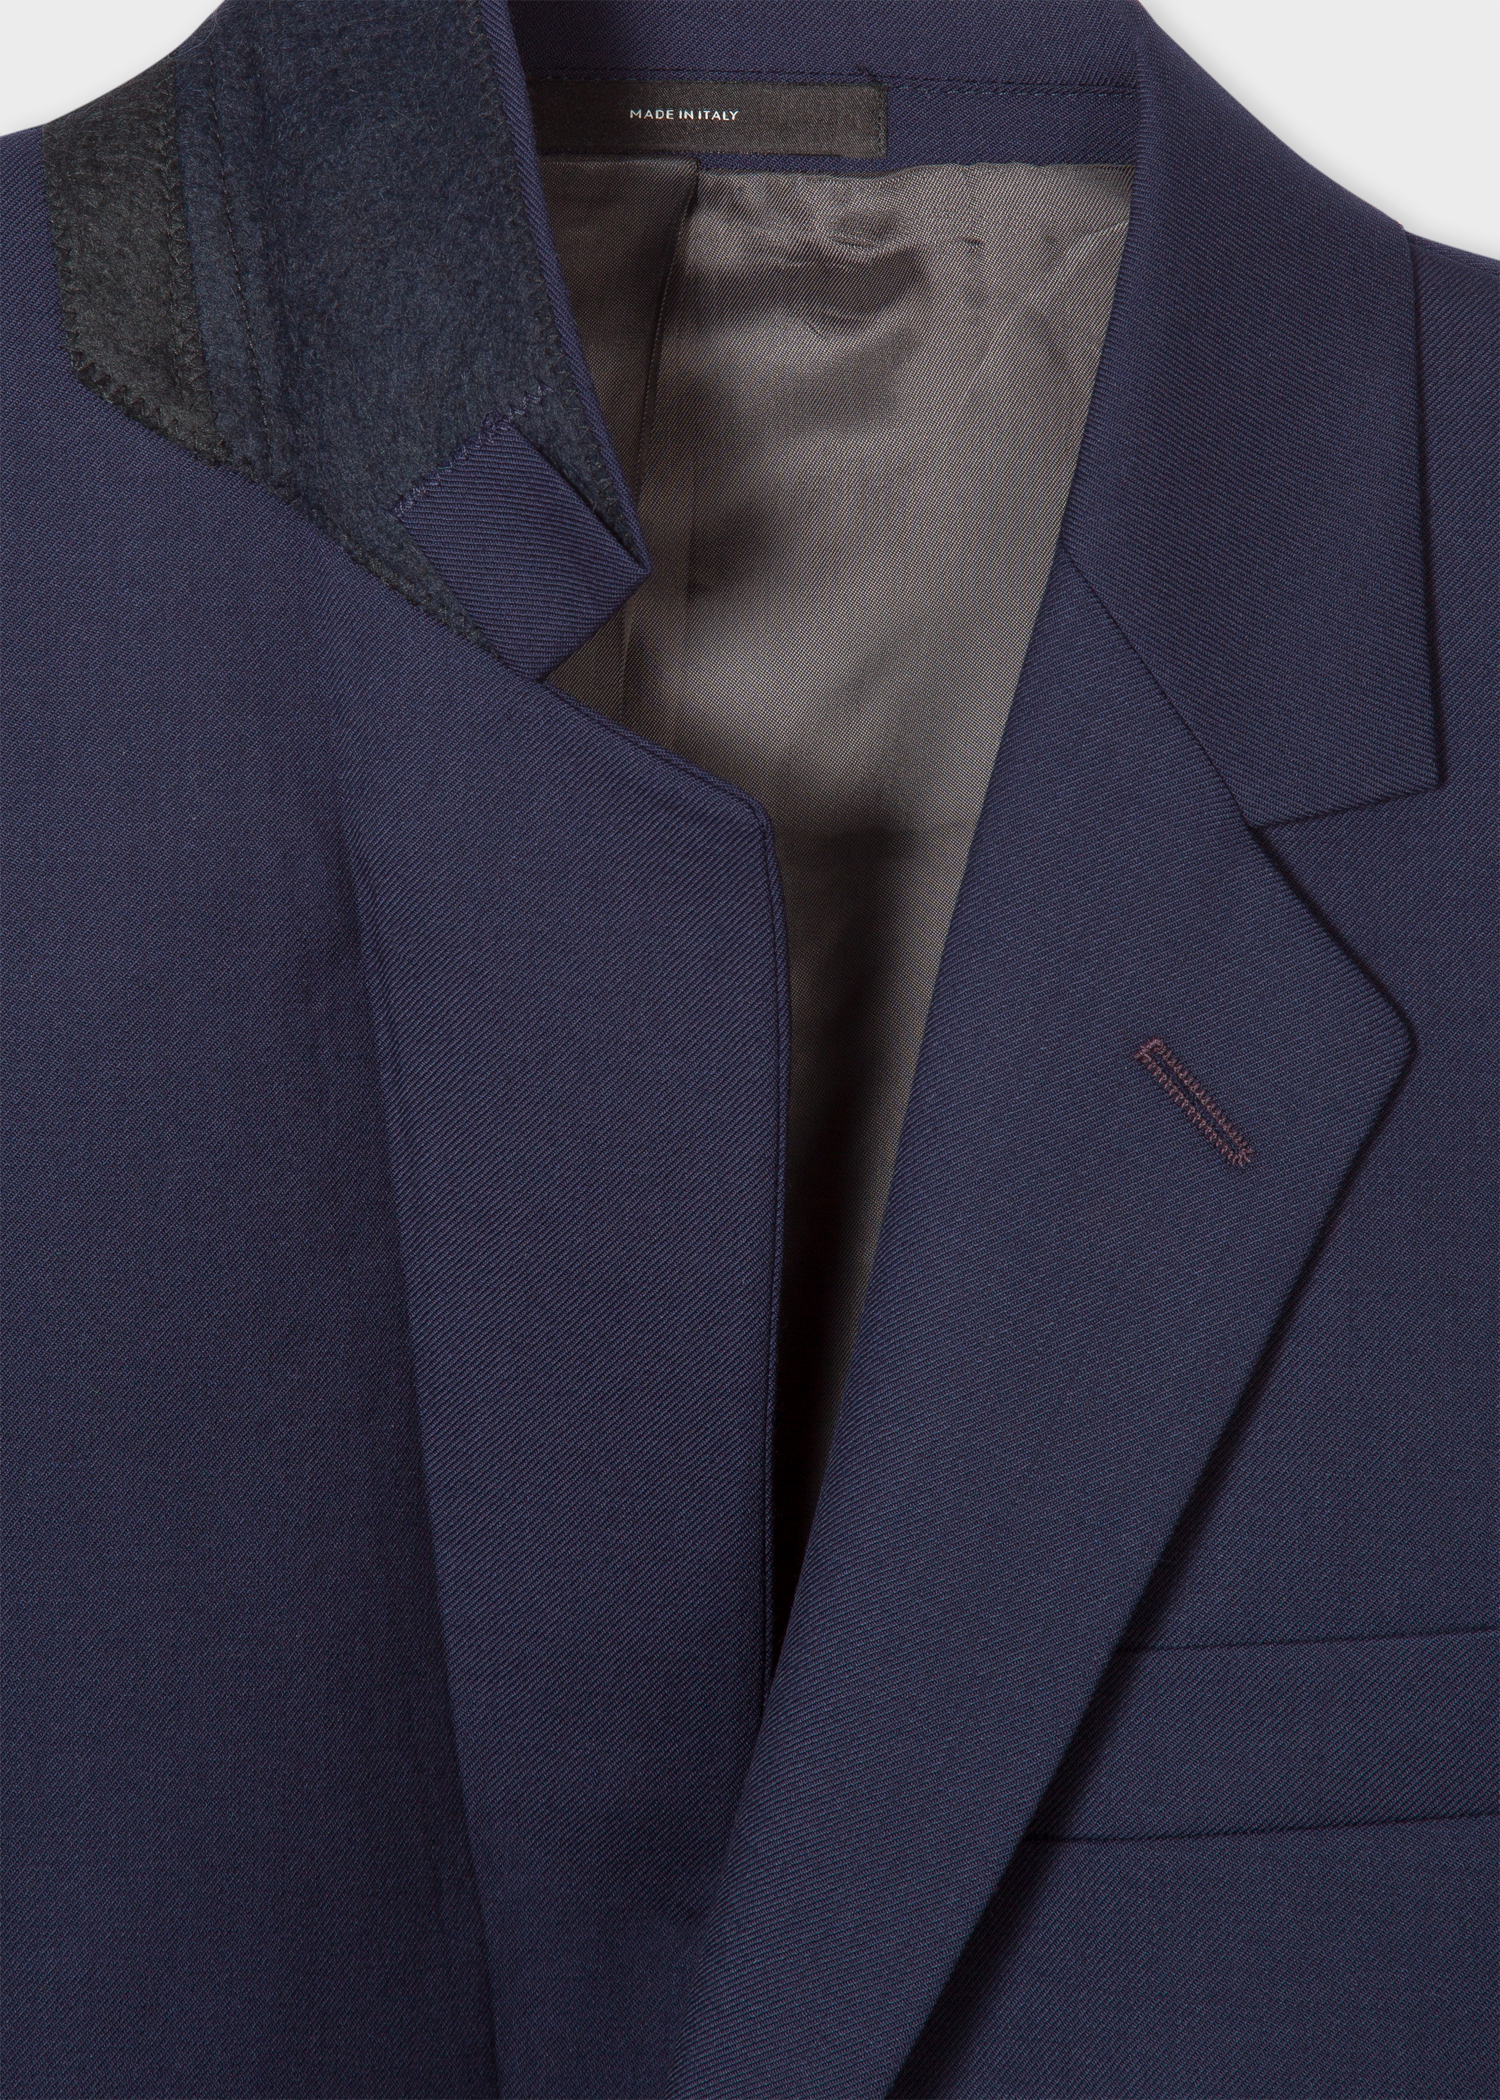 Detail view - The Piccadilly - Men's Tailored-Fit Navy Blue Wool Suit 'A Suit To Travel In'